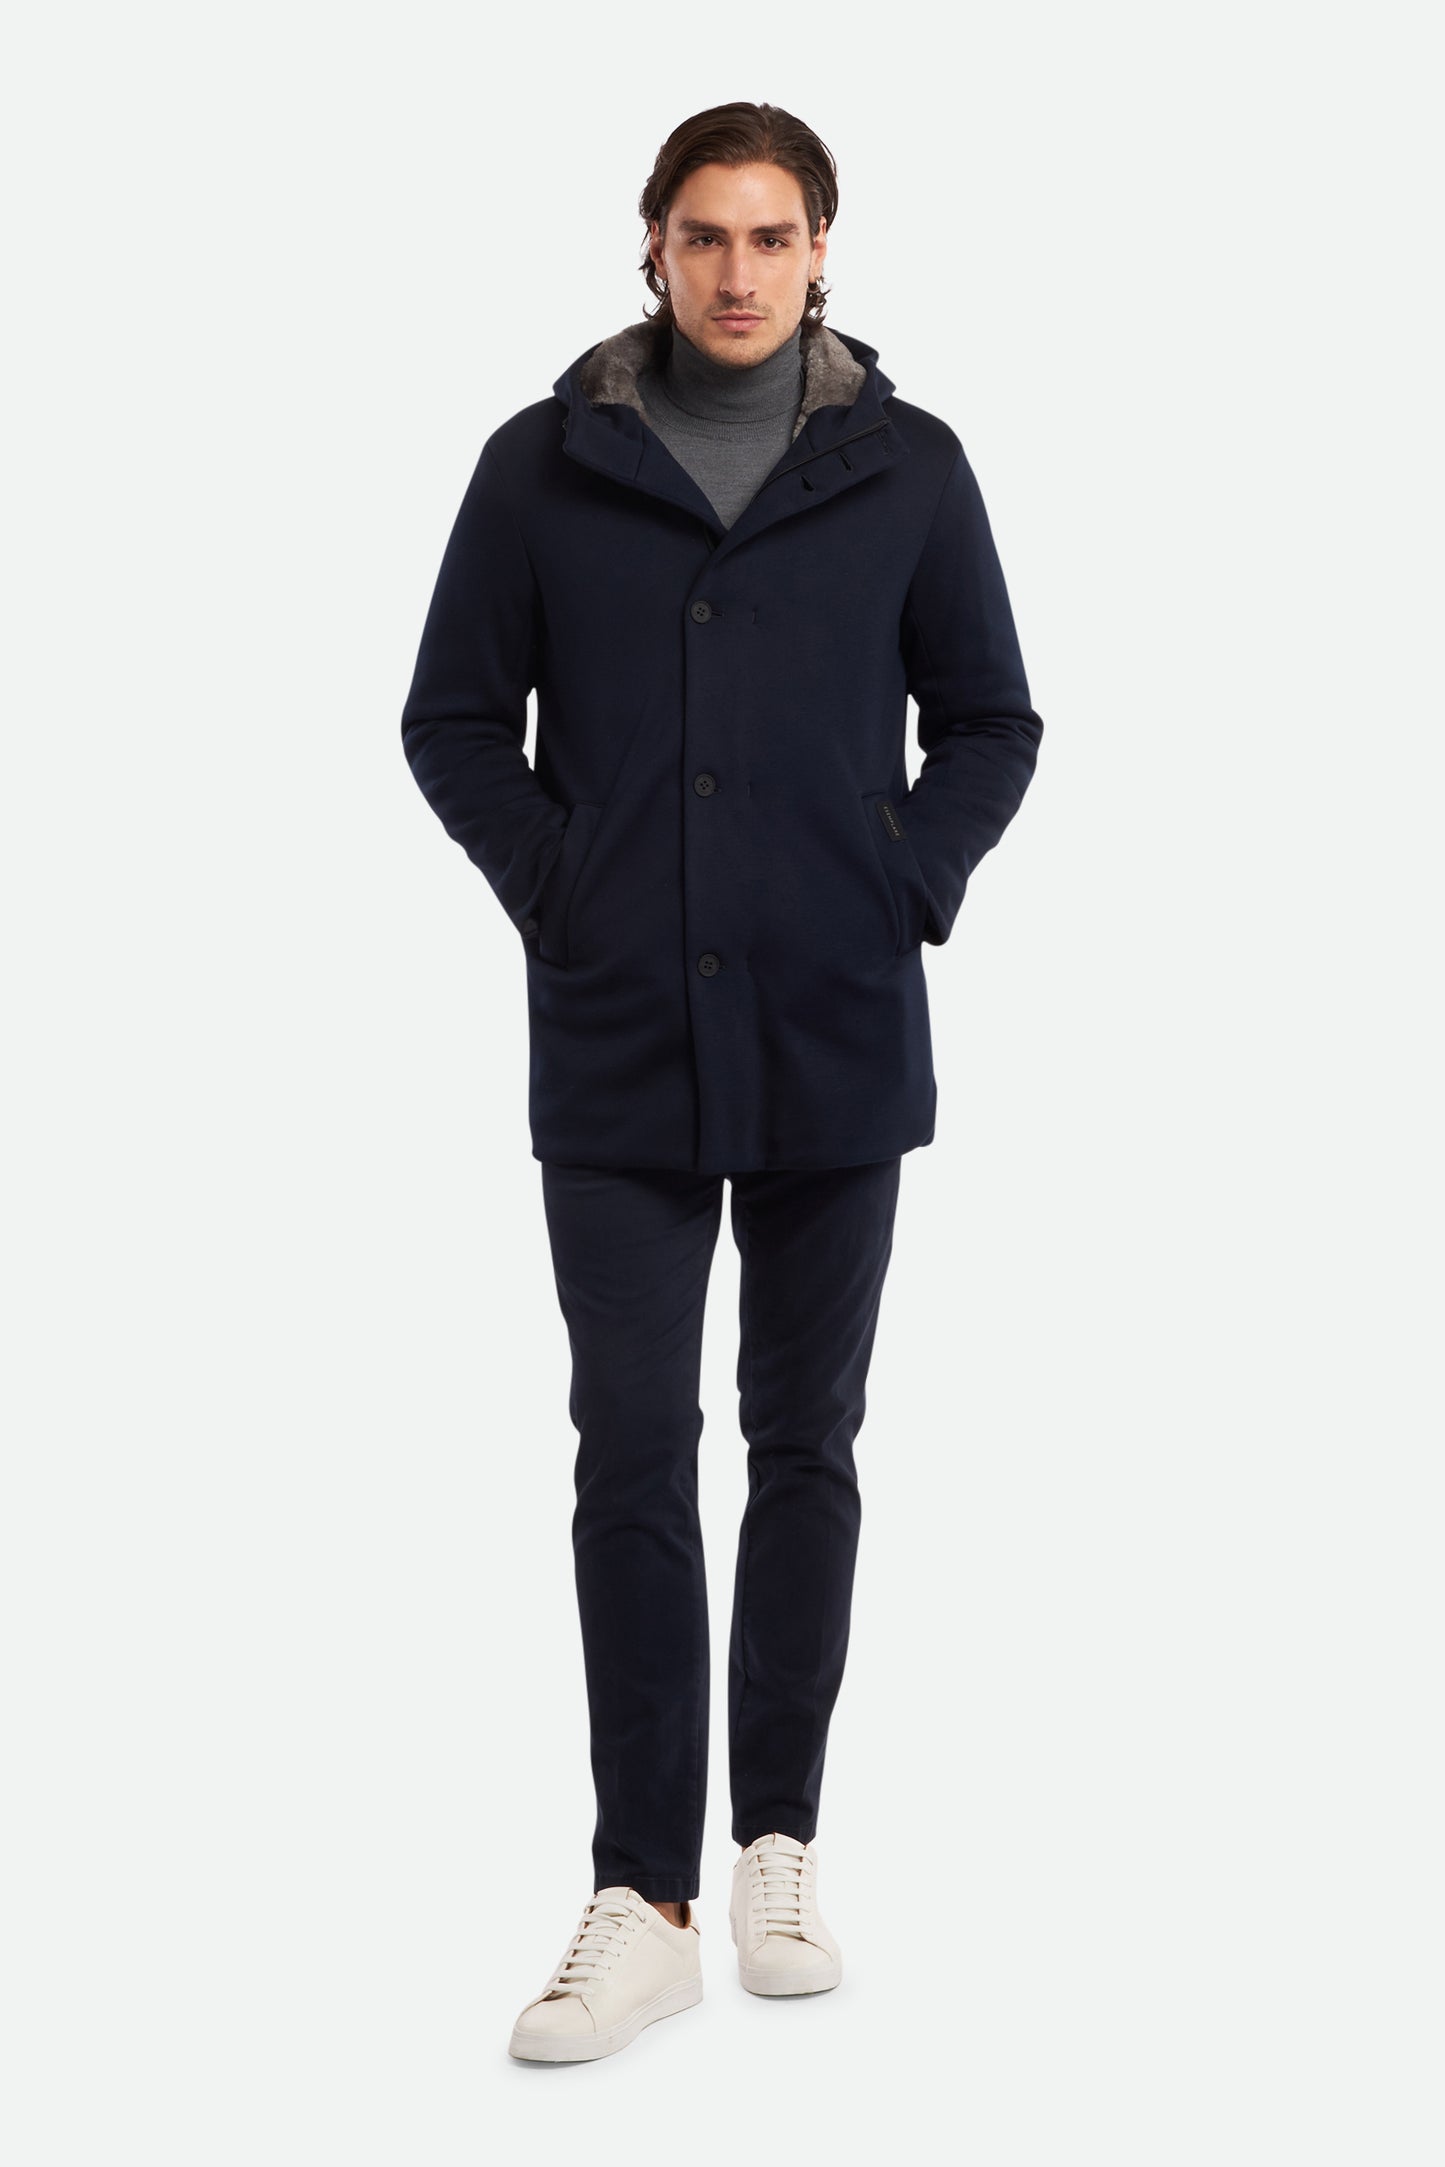 EXAMPLE
Esemplare parka in scuba with faux fur